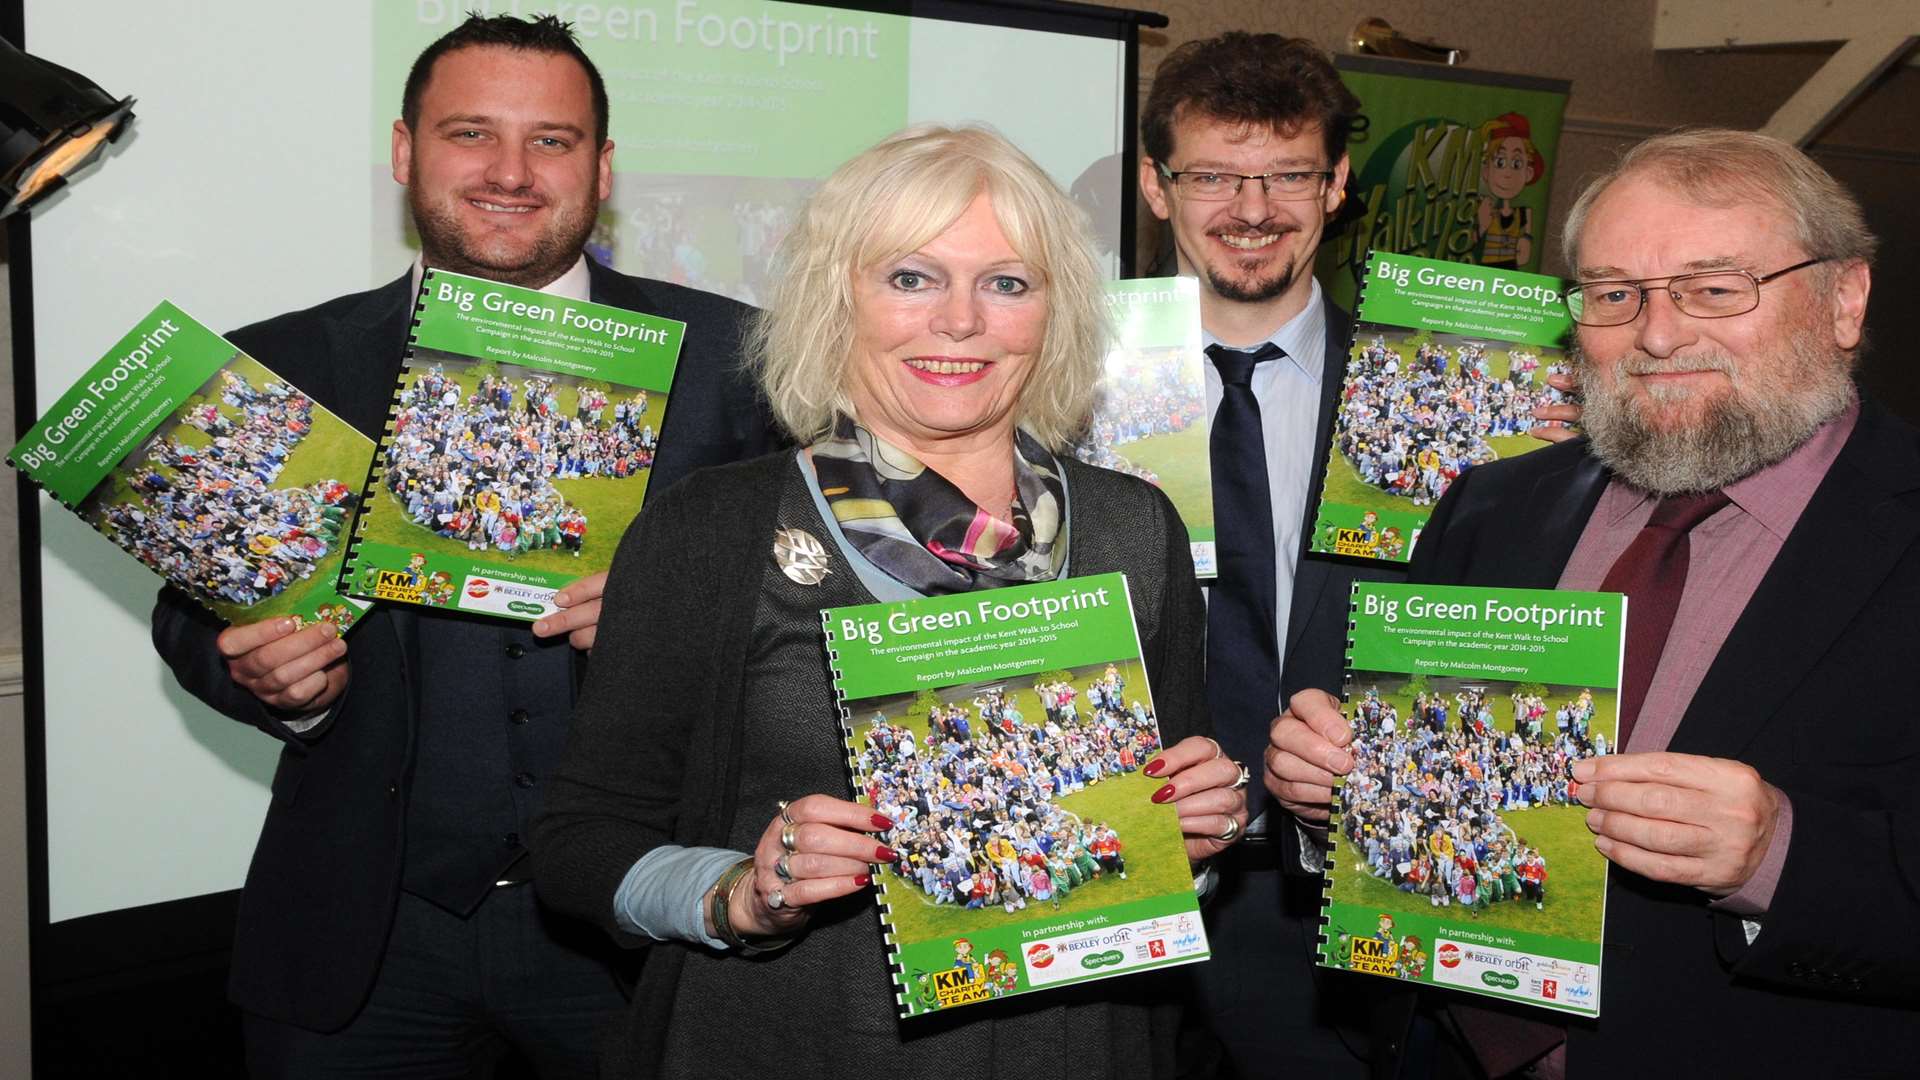 Matt Trusty of Specsavers, Craig Atkins of Orbit South and KM Charity Team trustees Gill Delahunty and Stuart Smith showcase the Big Green Footprint report at the KM Walk to School Awards presentation at Rowhill Grange, Wilmington